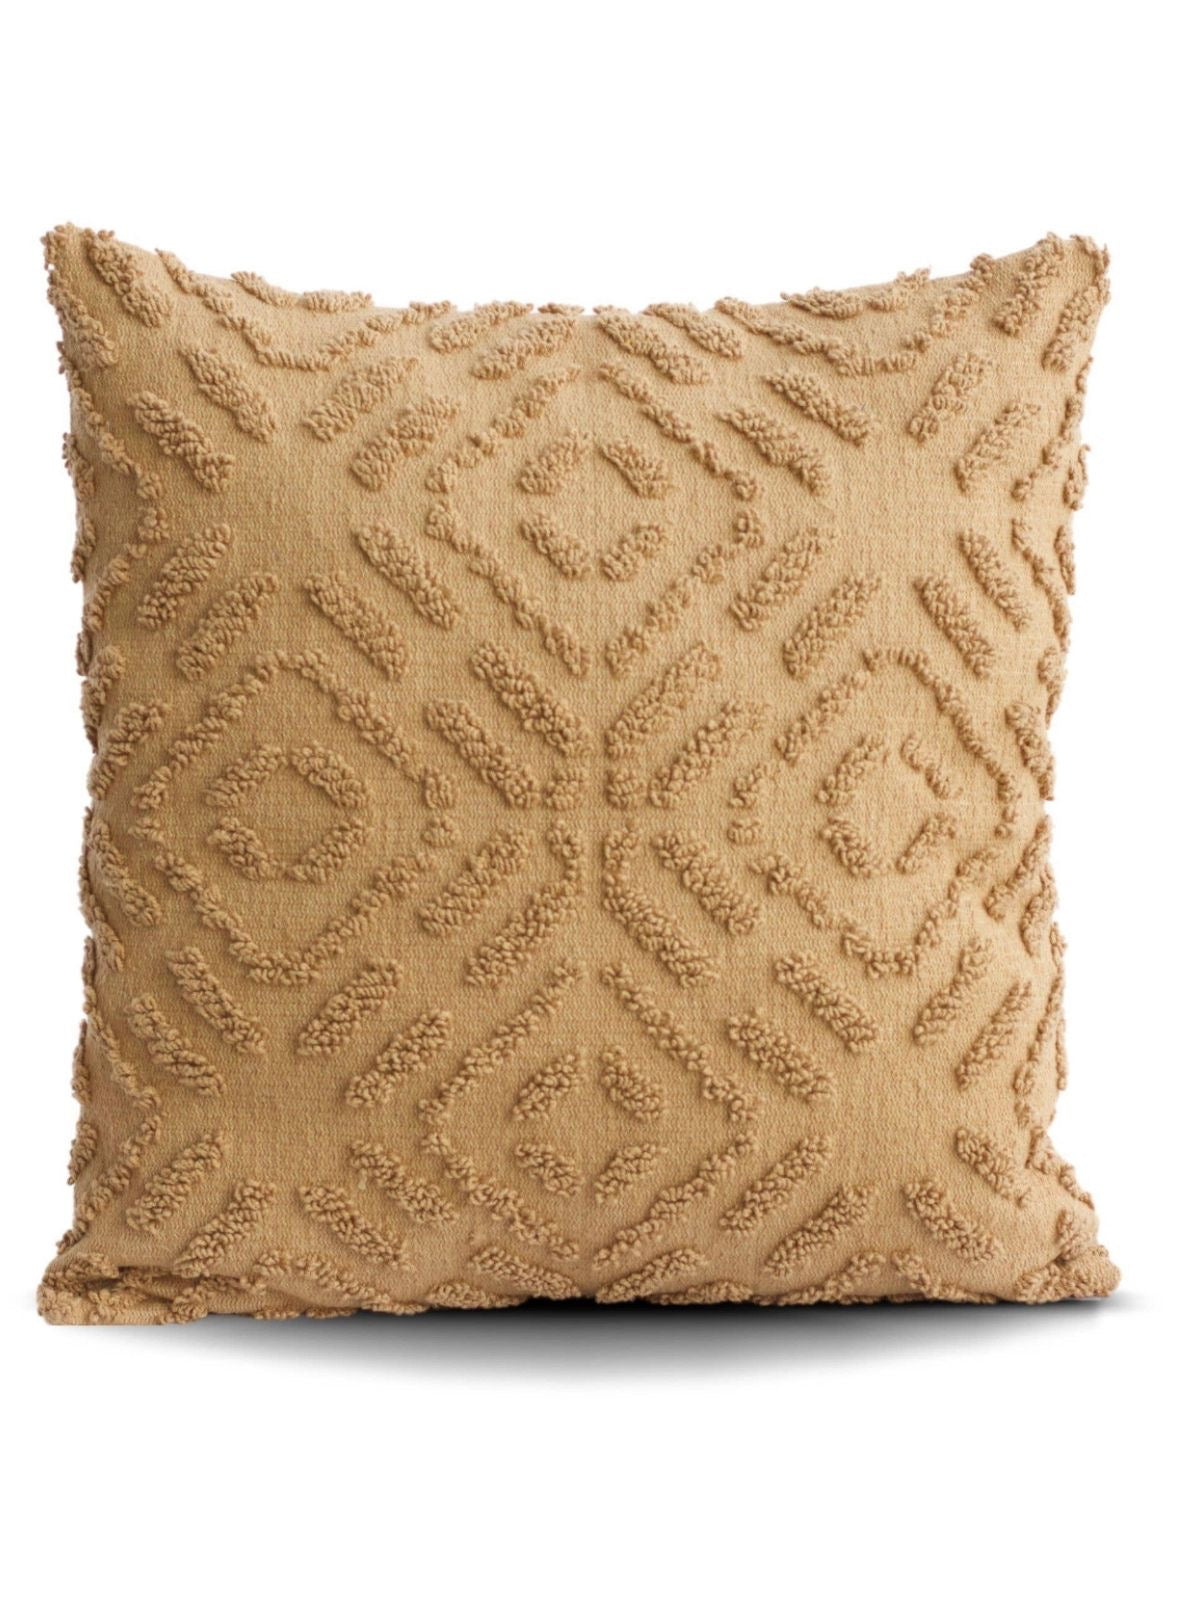 This 100% Cotton Maze Tufted 18x18 decorative pillow has a timeless design inspired by the ancient mystery of mazes with oh-so-soft texture and patterning. Sold by KYA Home Decor